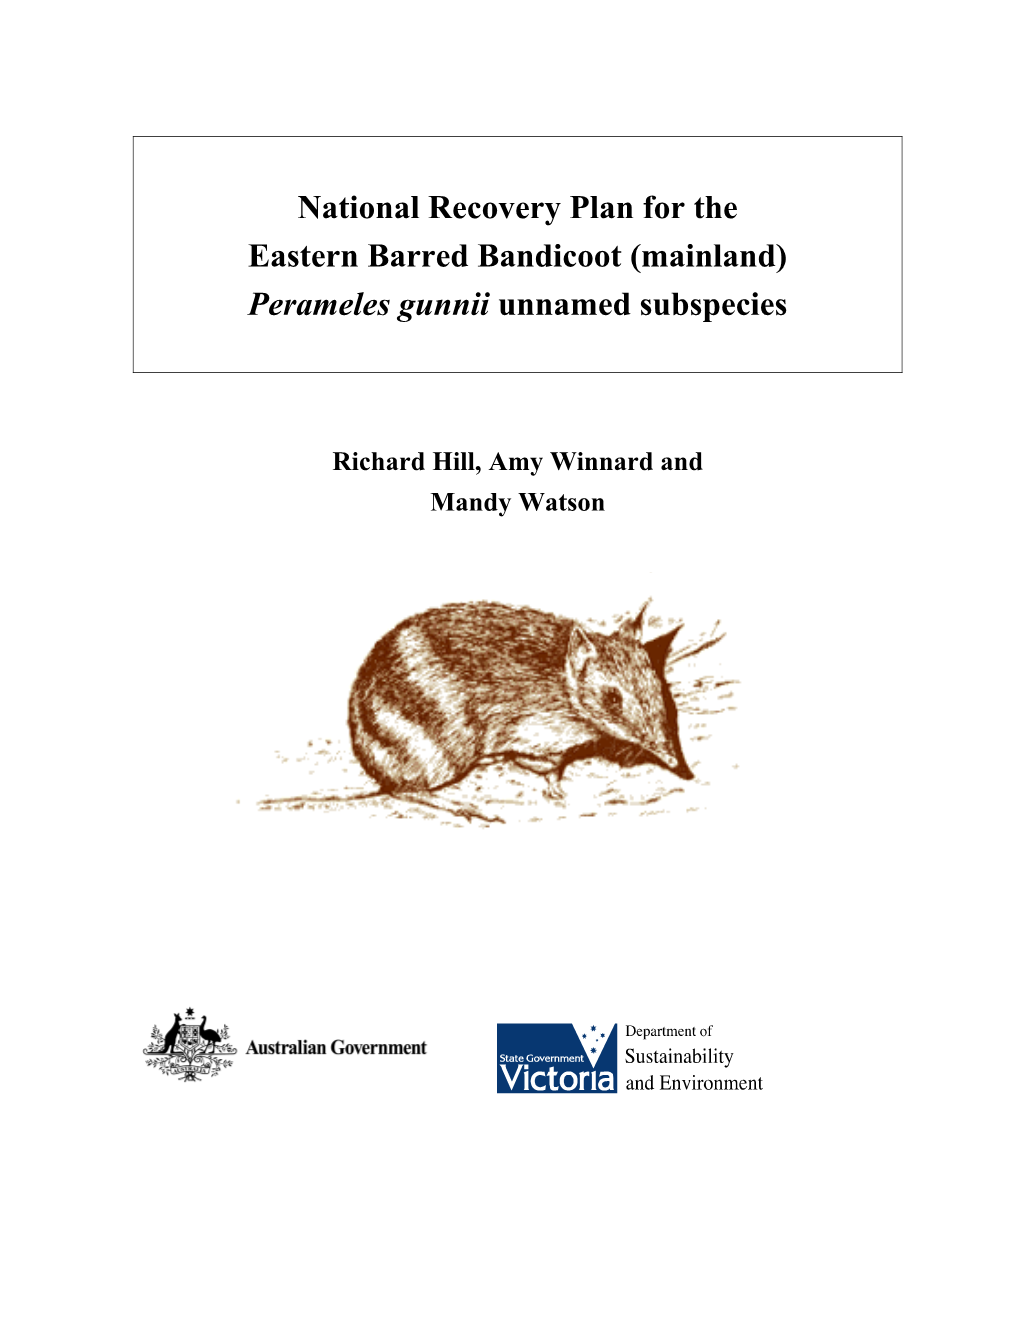 National Recovery Plan for the Eastern Barred Bandicoot (Mainland) Perameles Gunnii Unnamed